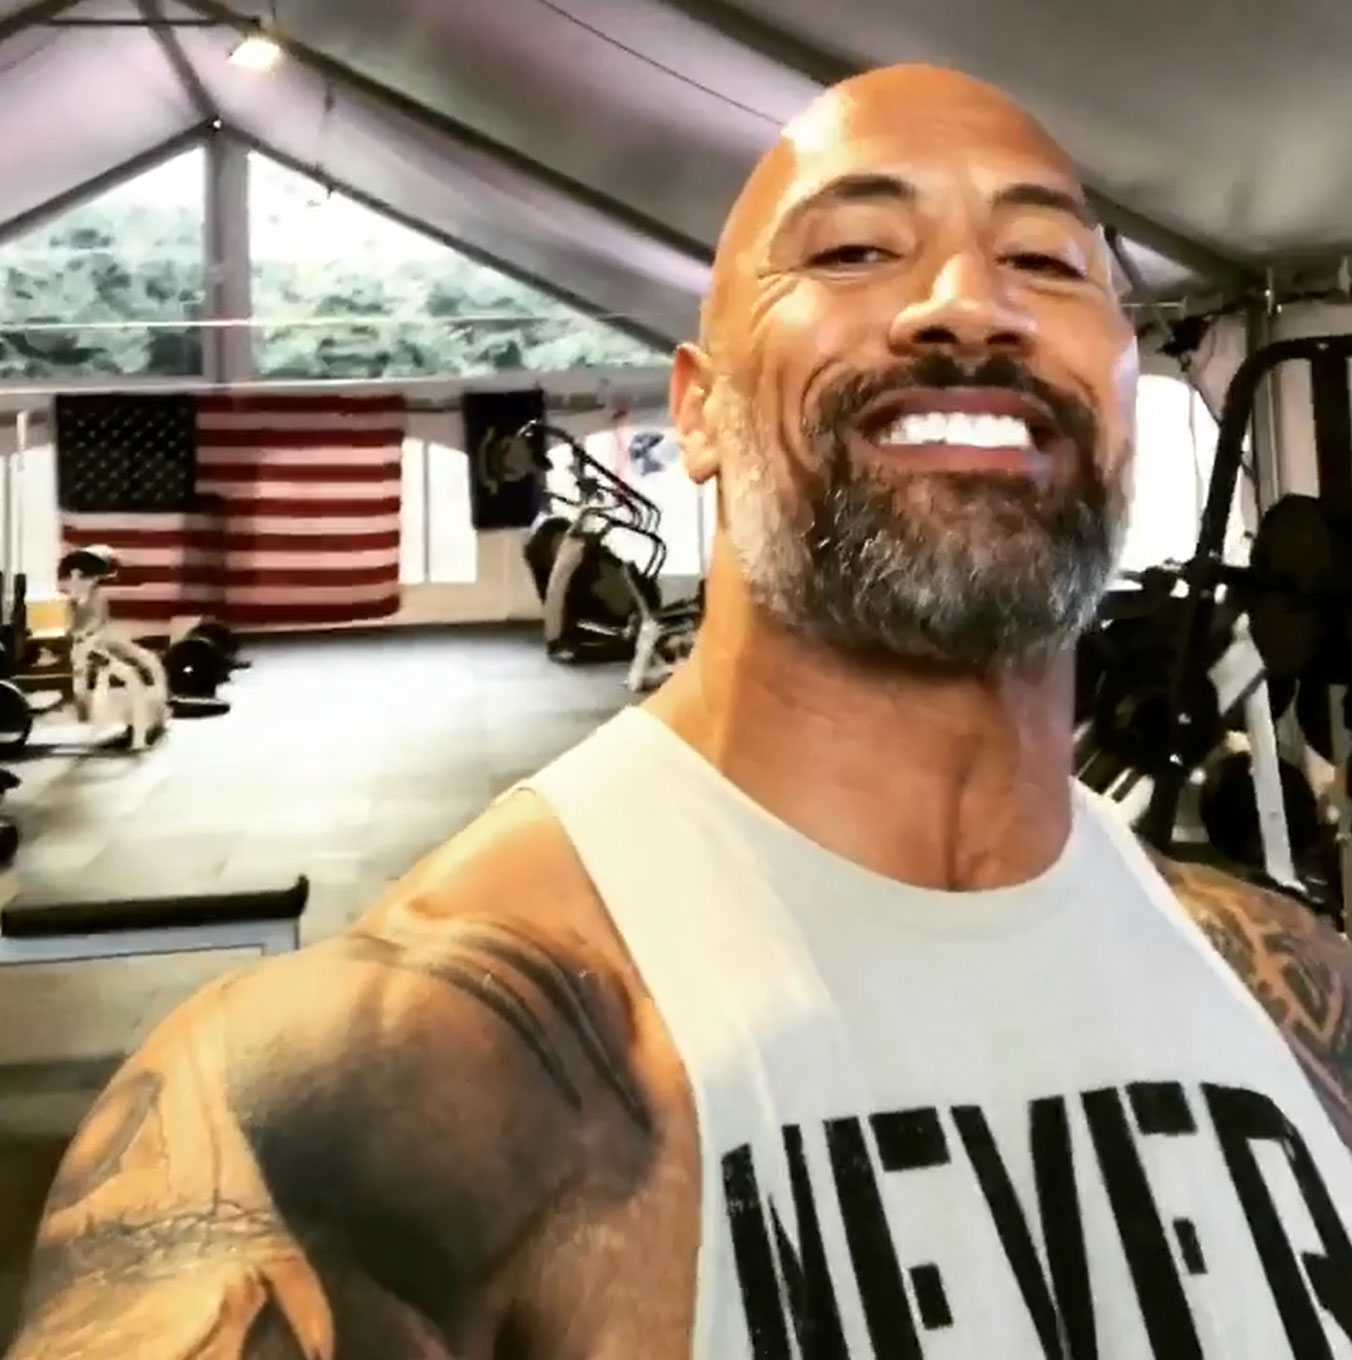 Dwayne has admitted to urinating into bottles while working out